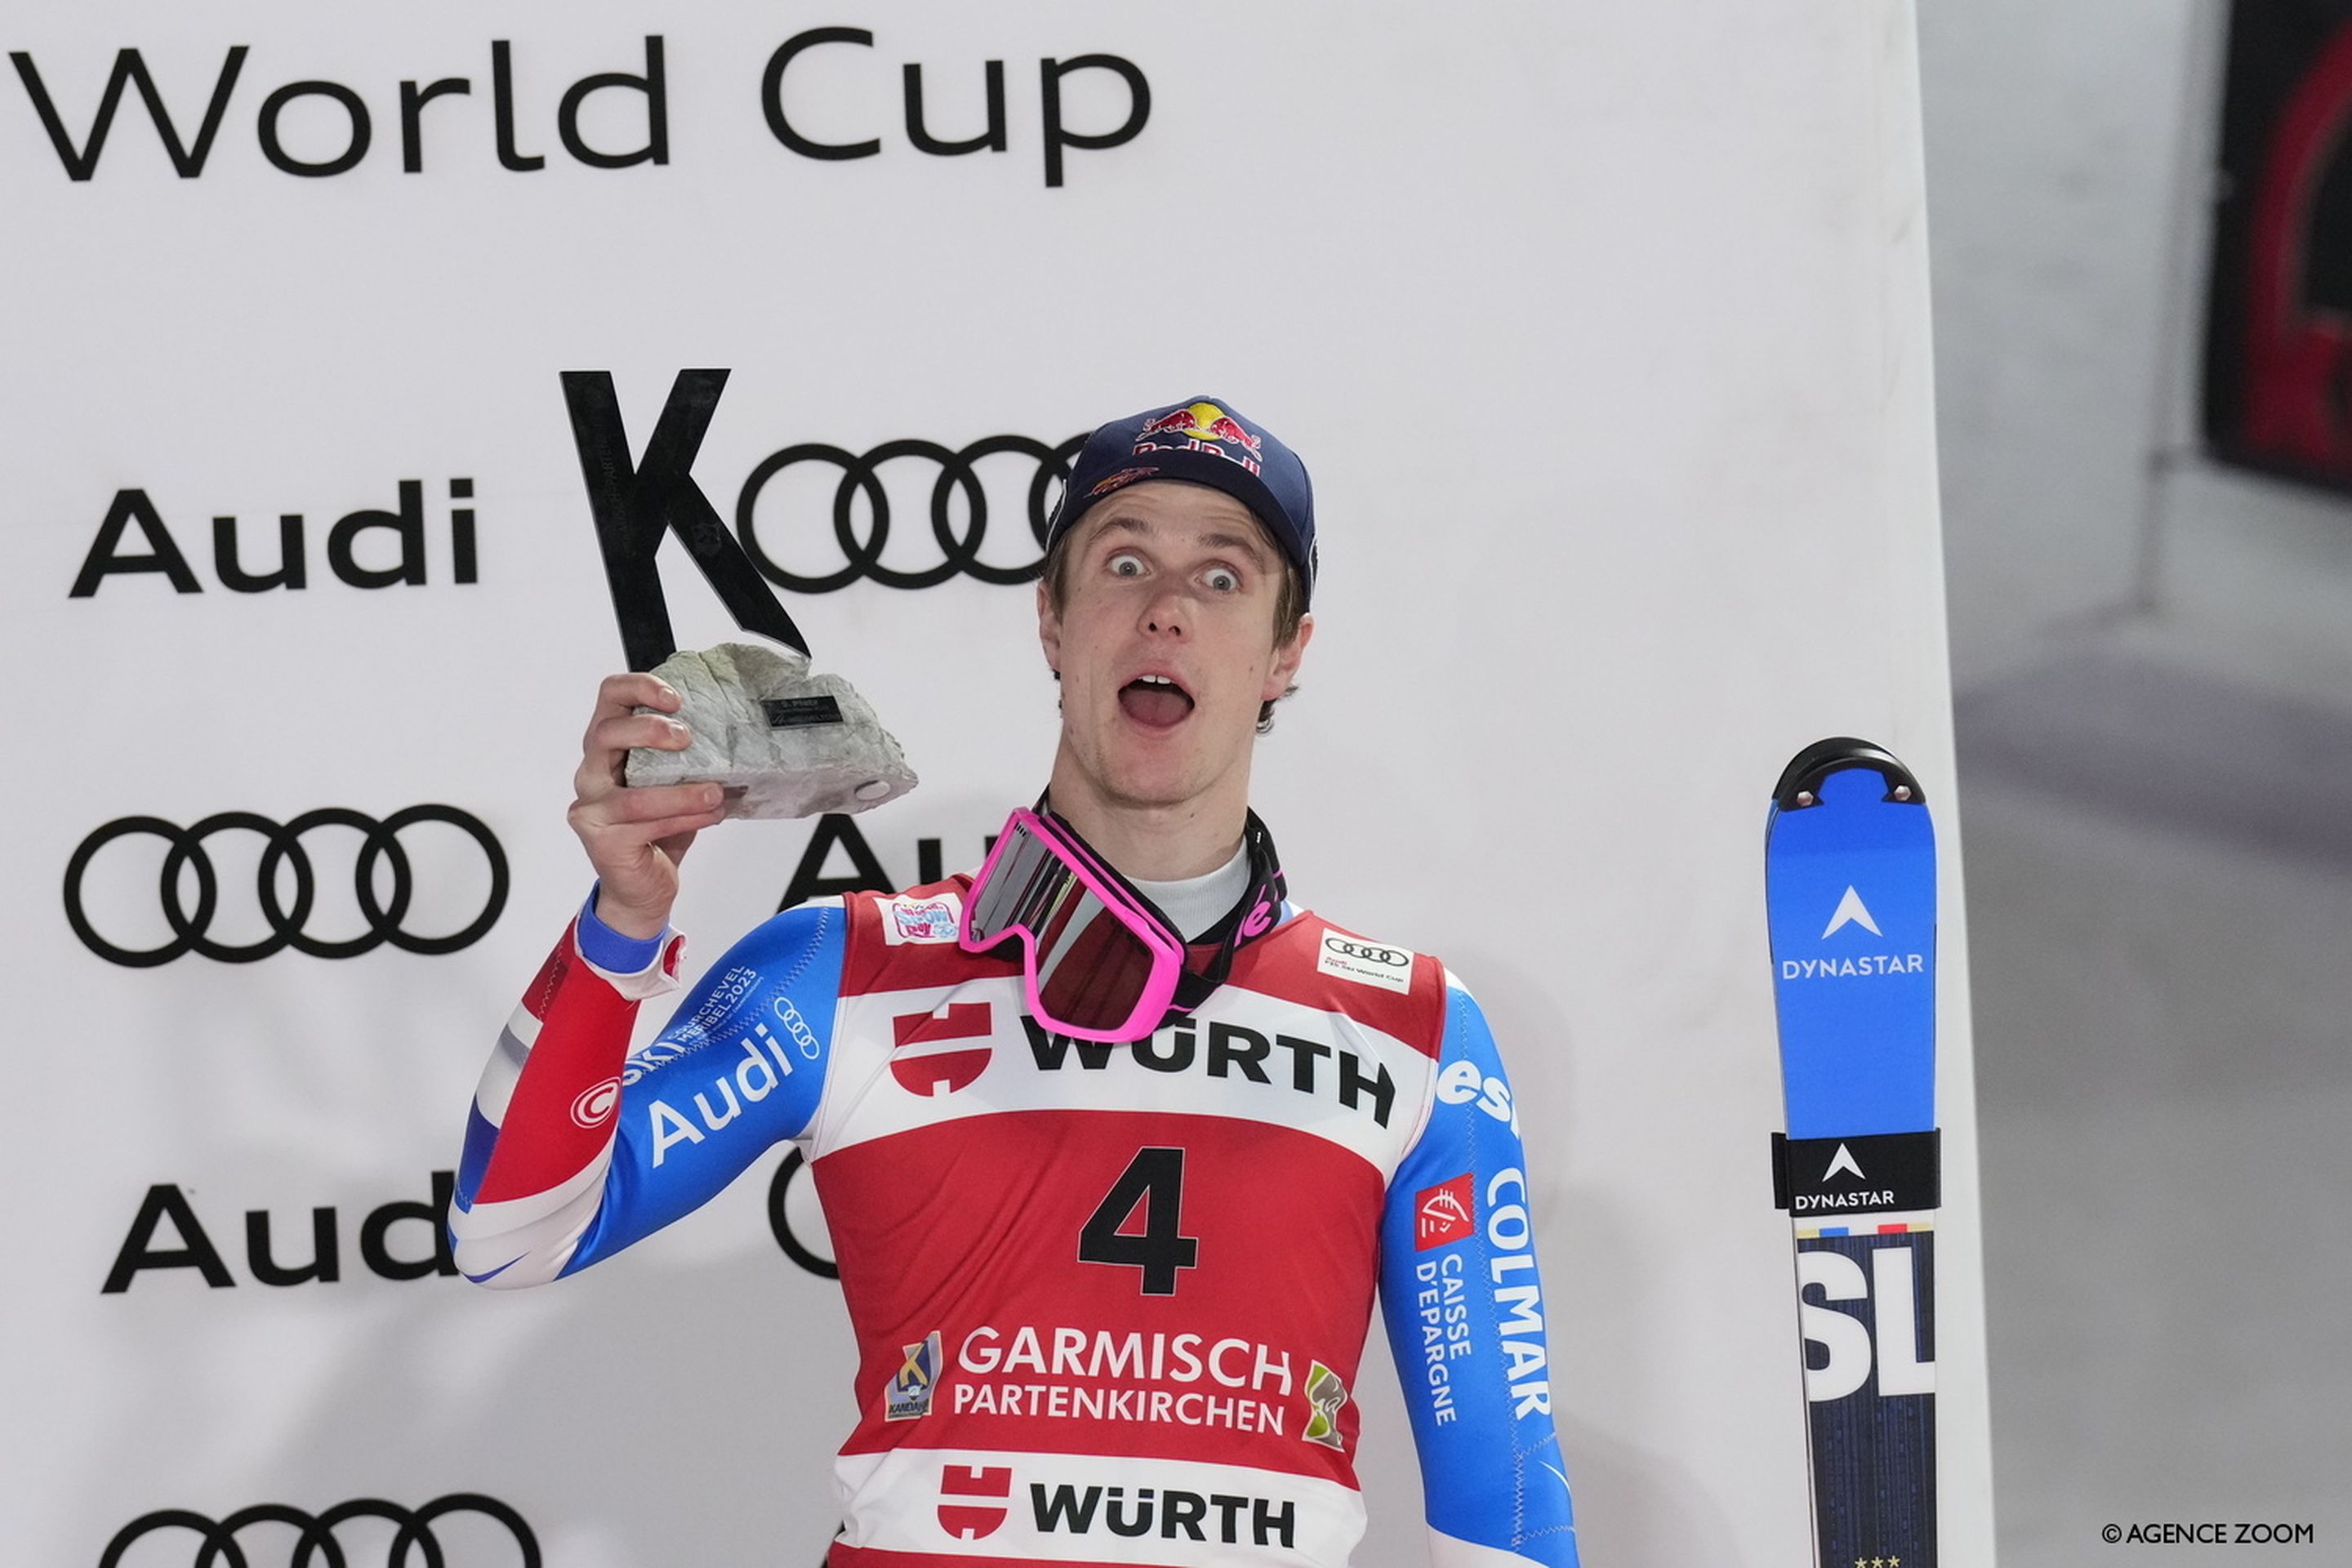 Noel was a relieved man after finishing his first World Cup slalom race this season (Agence Zoom)